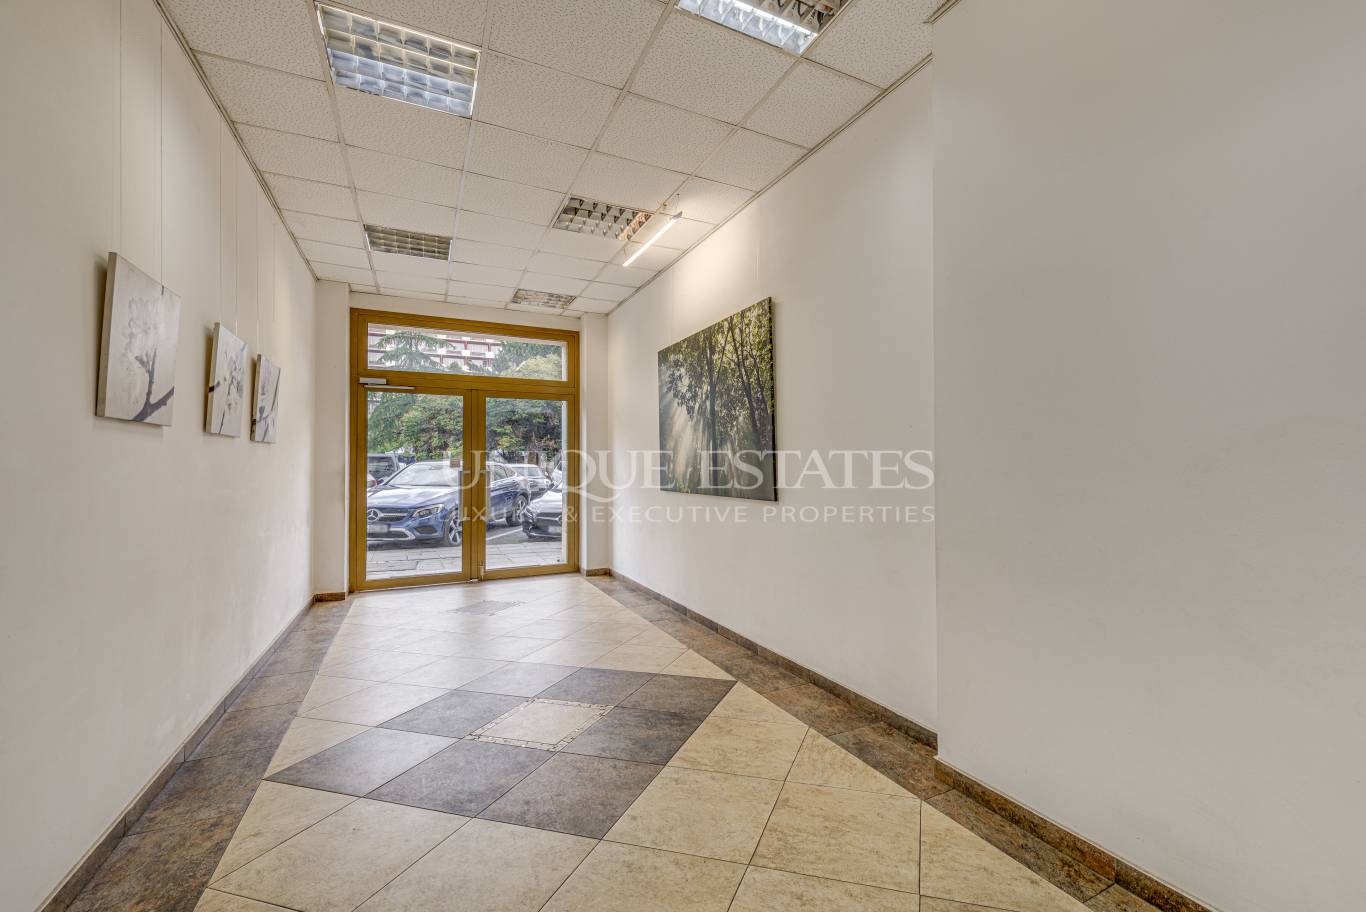 Office for rent in Sofia, Downtown with listing ID: K4831 - image 12